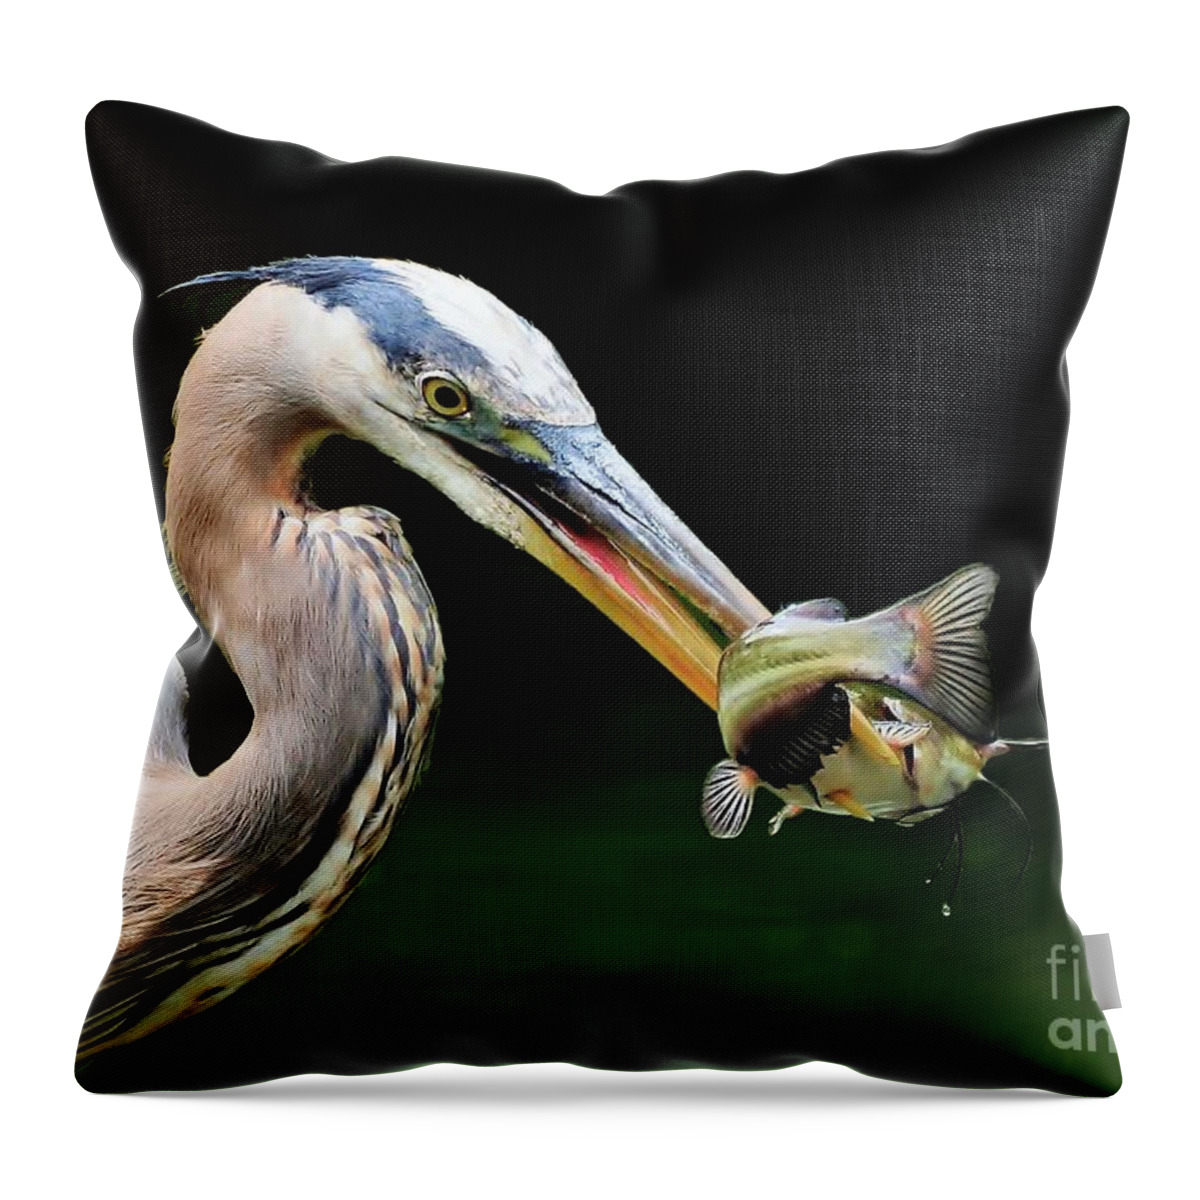 Heron Throw Pillow featuring the photograph Great Blue Heron And The Catfish by Kathy Baccari